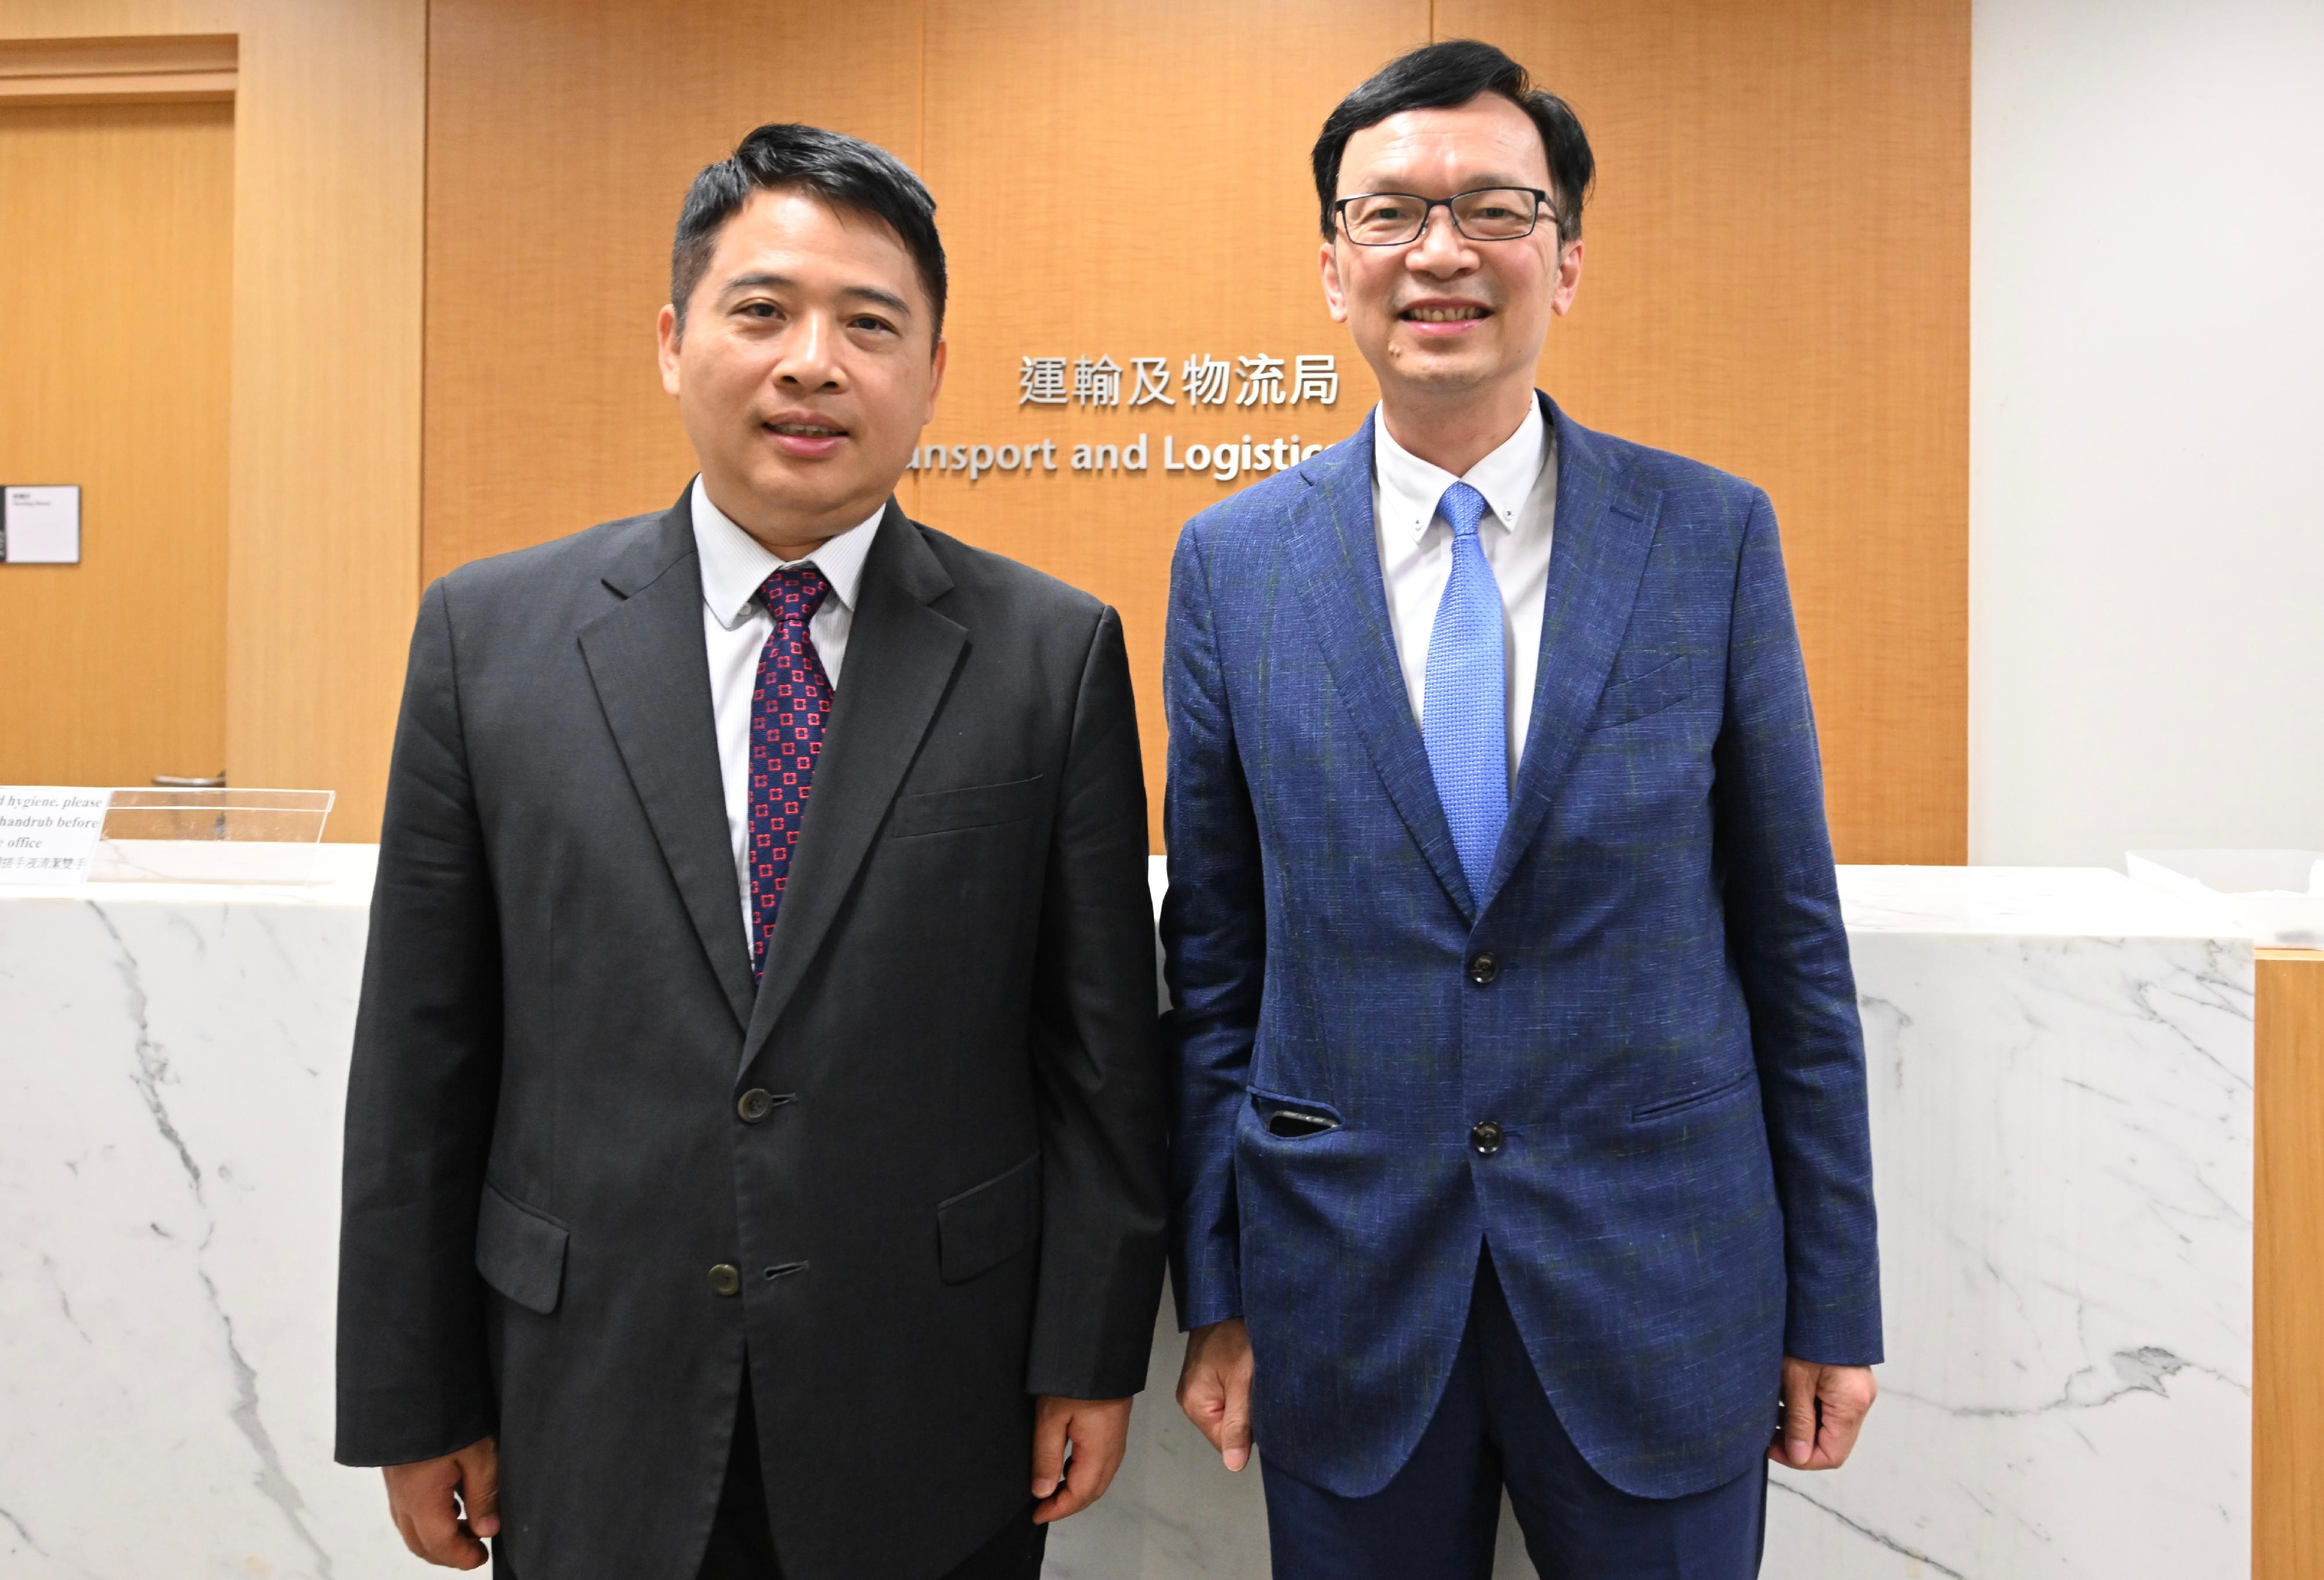 The Acting Secretary for Transport and Logistics, Mr Liu Chun-san (right), met the Mayor of the Zhuhai Municipal Government, Mr Huang Zhihao (left), today (May 19) to exchange views on deepening co-operation between Hong Kong and Zhuhai on logistics and aviation.